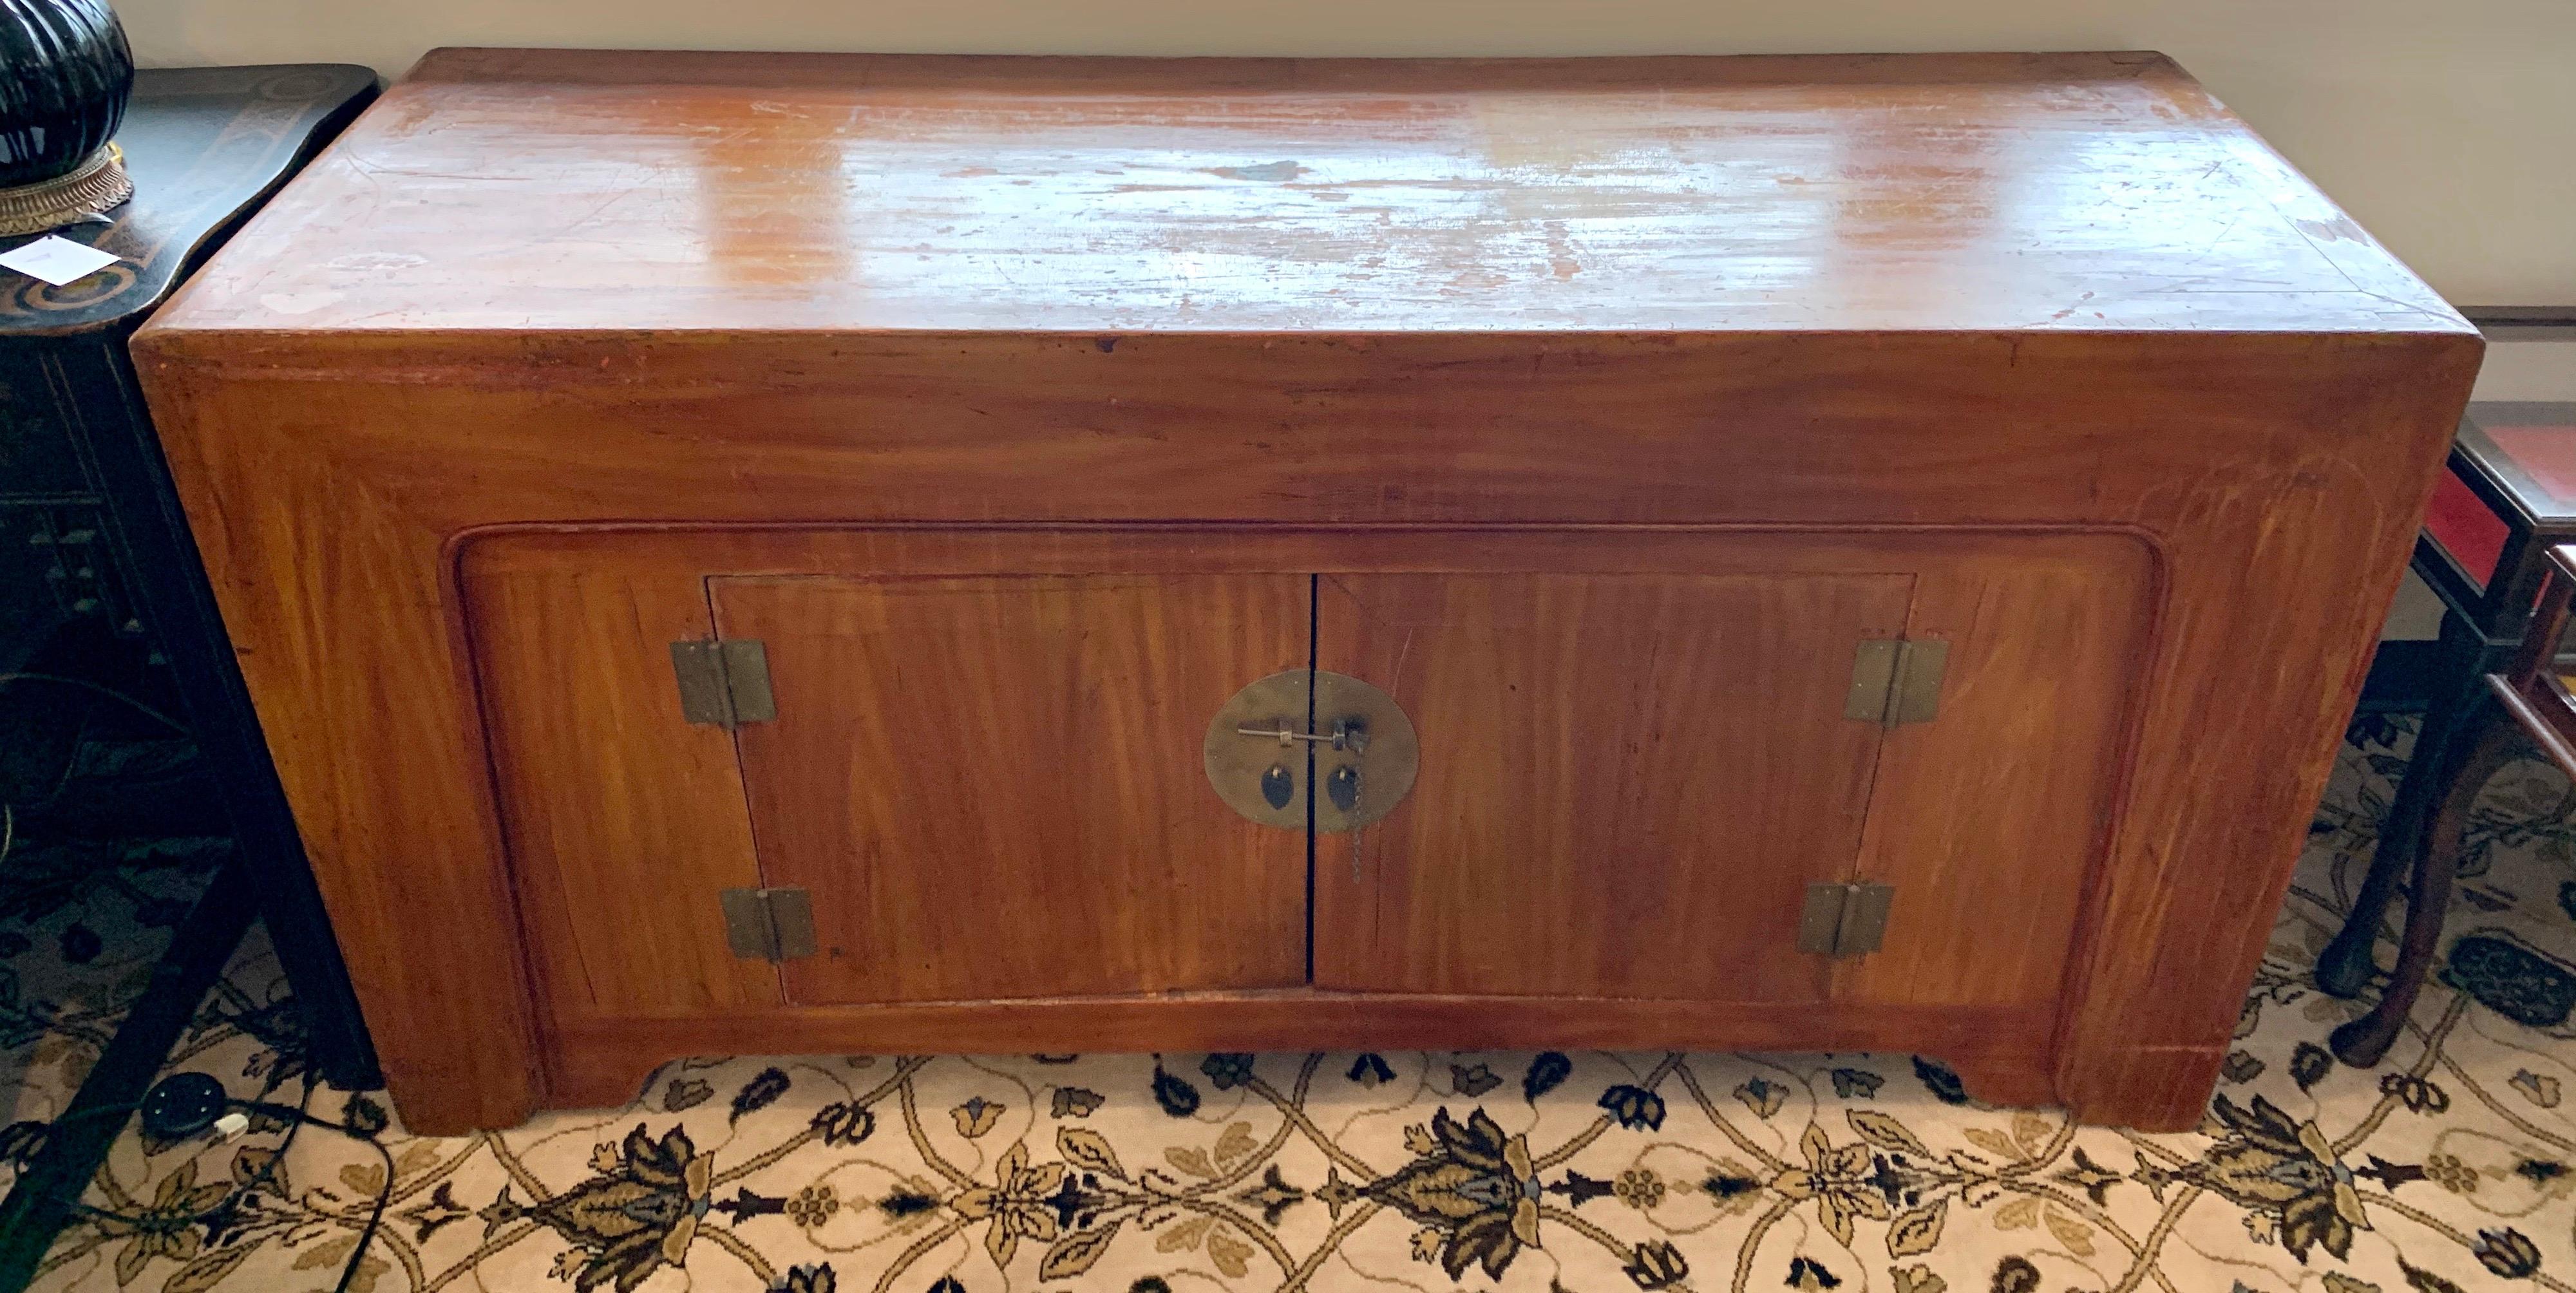 Late 19th-Century Chinese buffet credenza made of heavy solid elmwood boards with beautiful graining. A bronze central medallion anchors the chest flanked by two bronze hinges. Center doors open to storage with hidden storage underneath, behind a